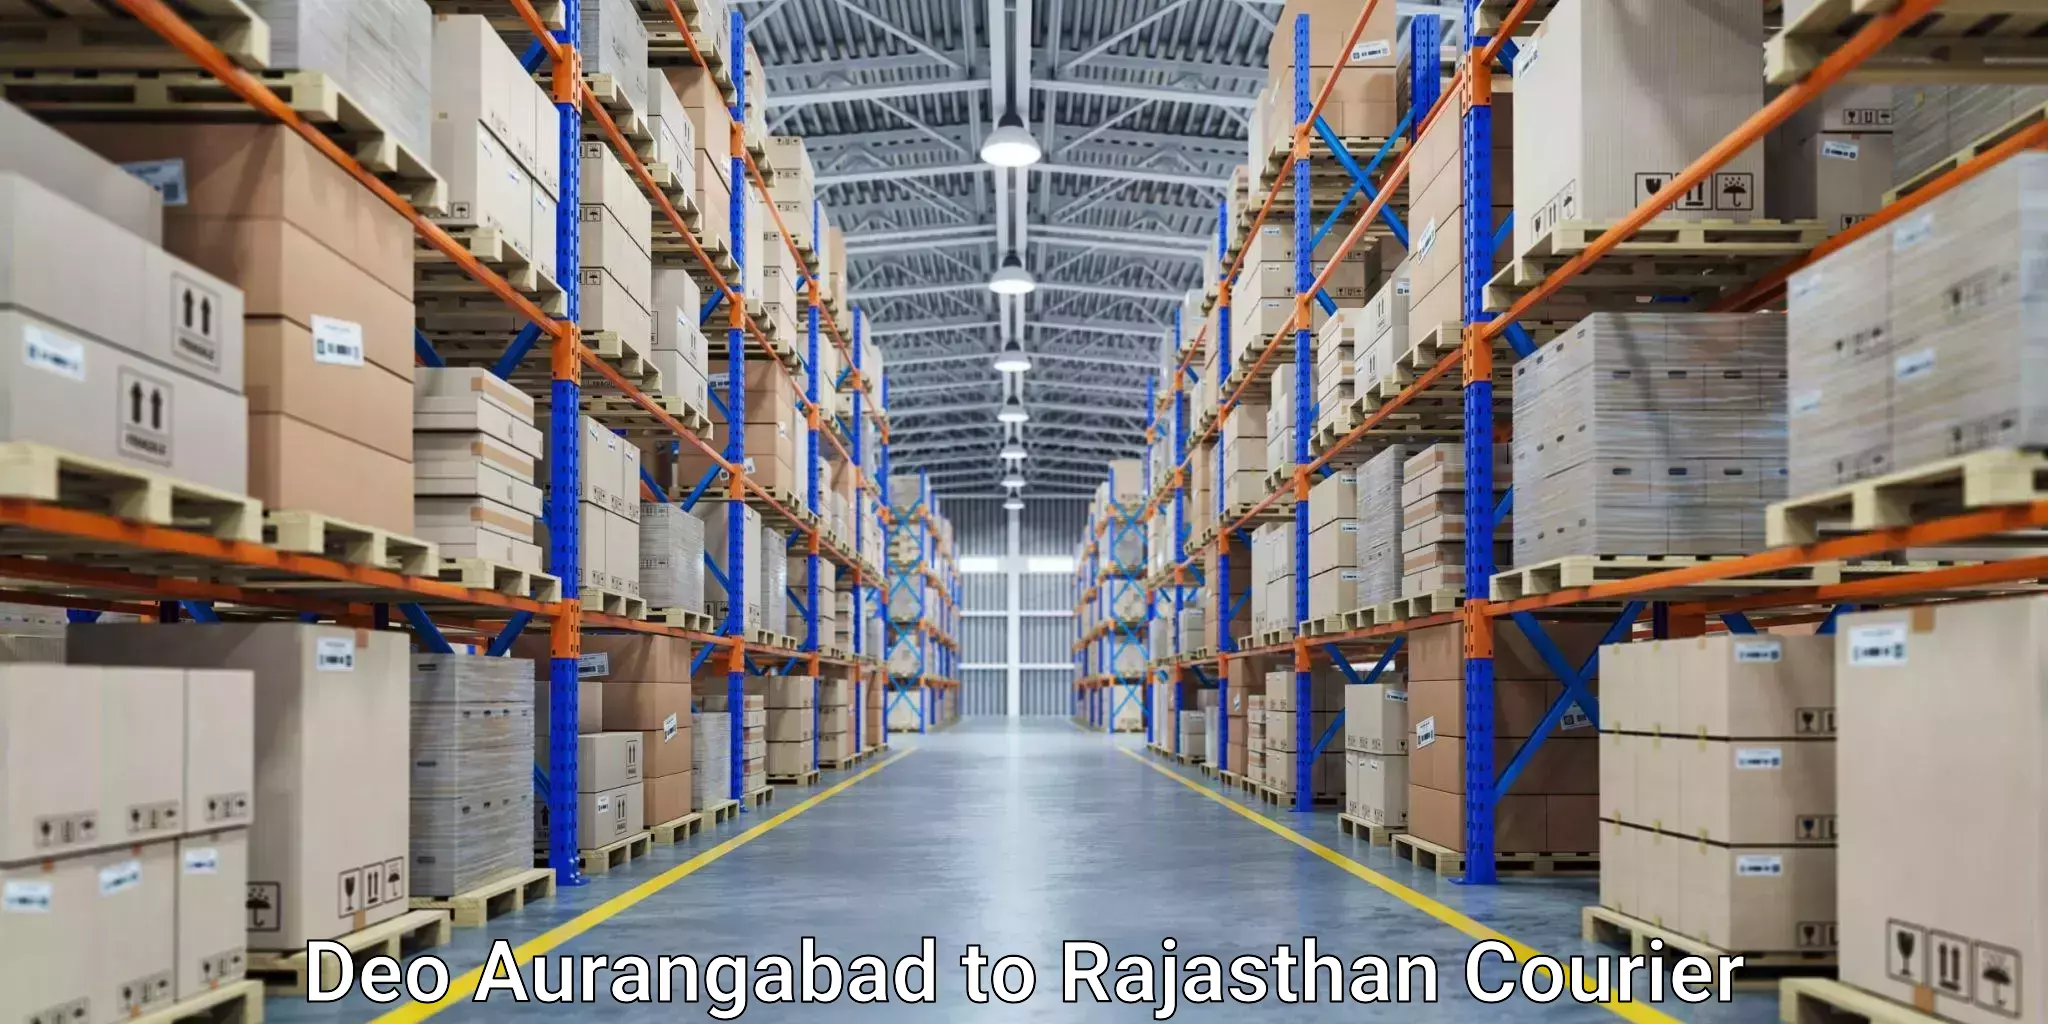 Large-scale shipping solutions Deo Aurangabad to Sultana